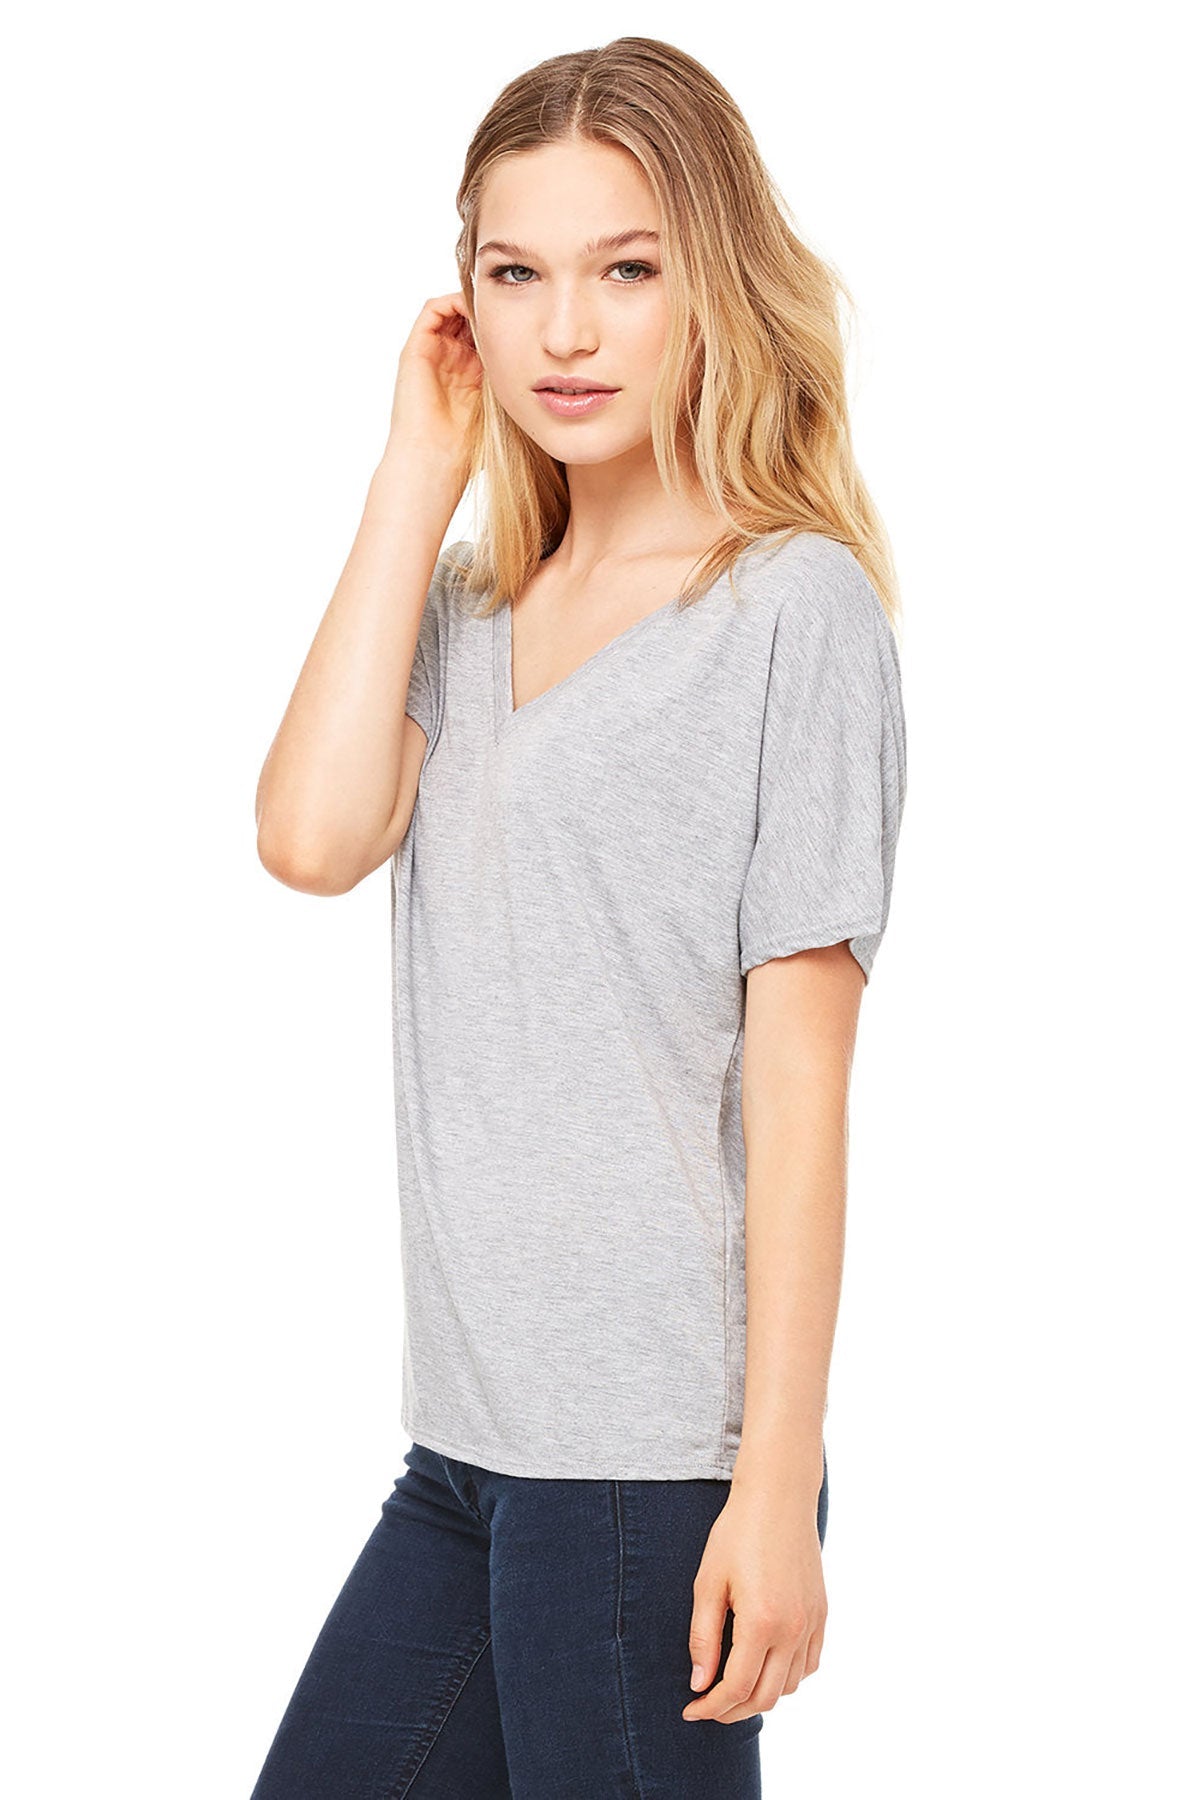 Bella Canvas Ladies Slouchy V-Neck T-Shirt, Athletic Heather